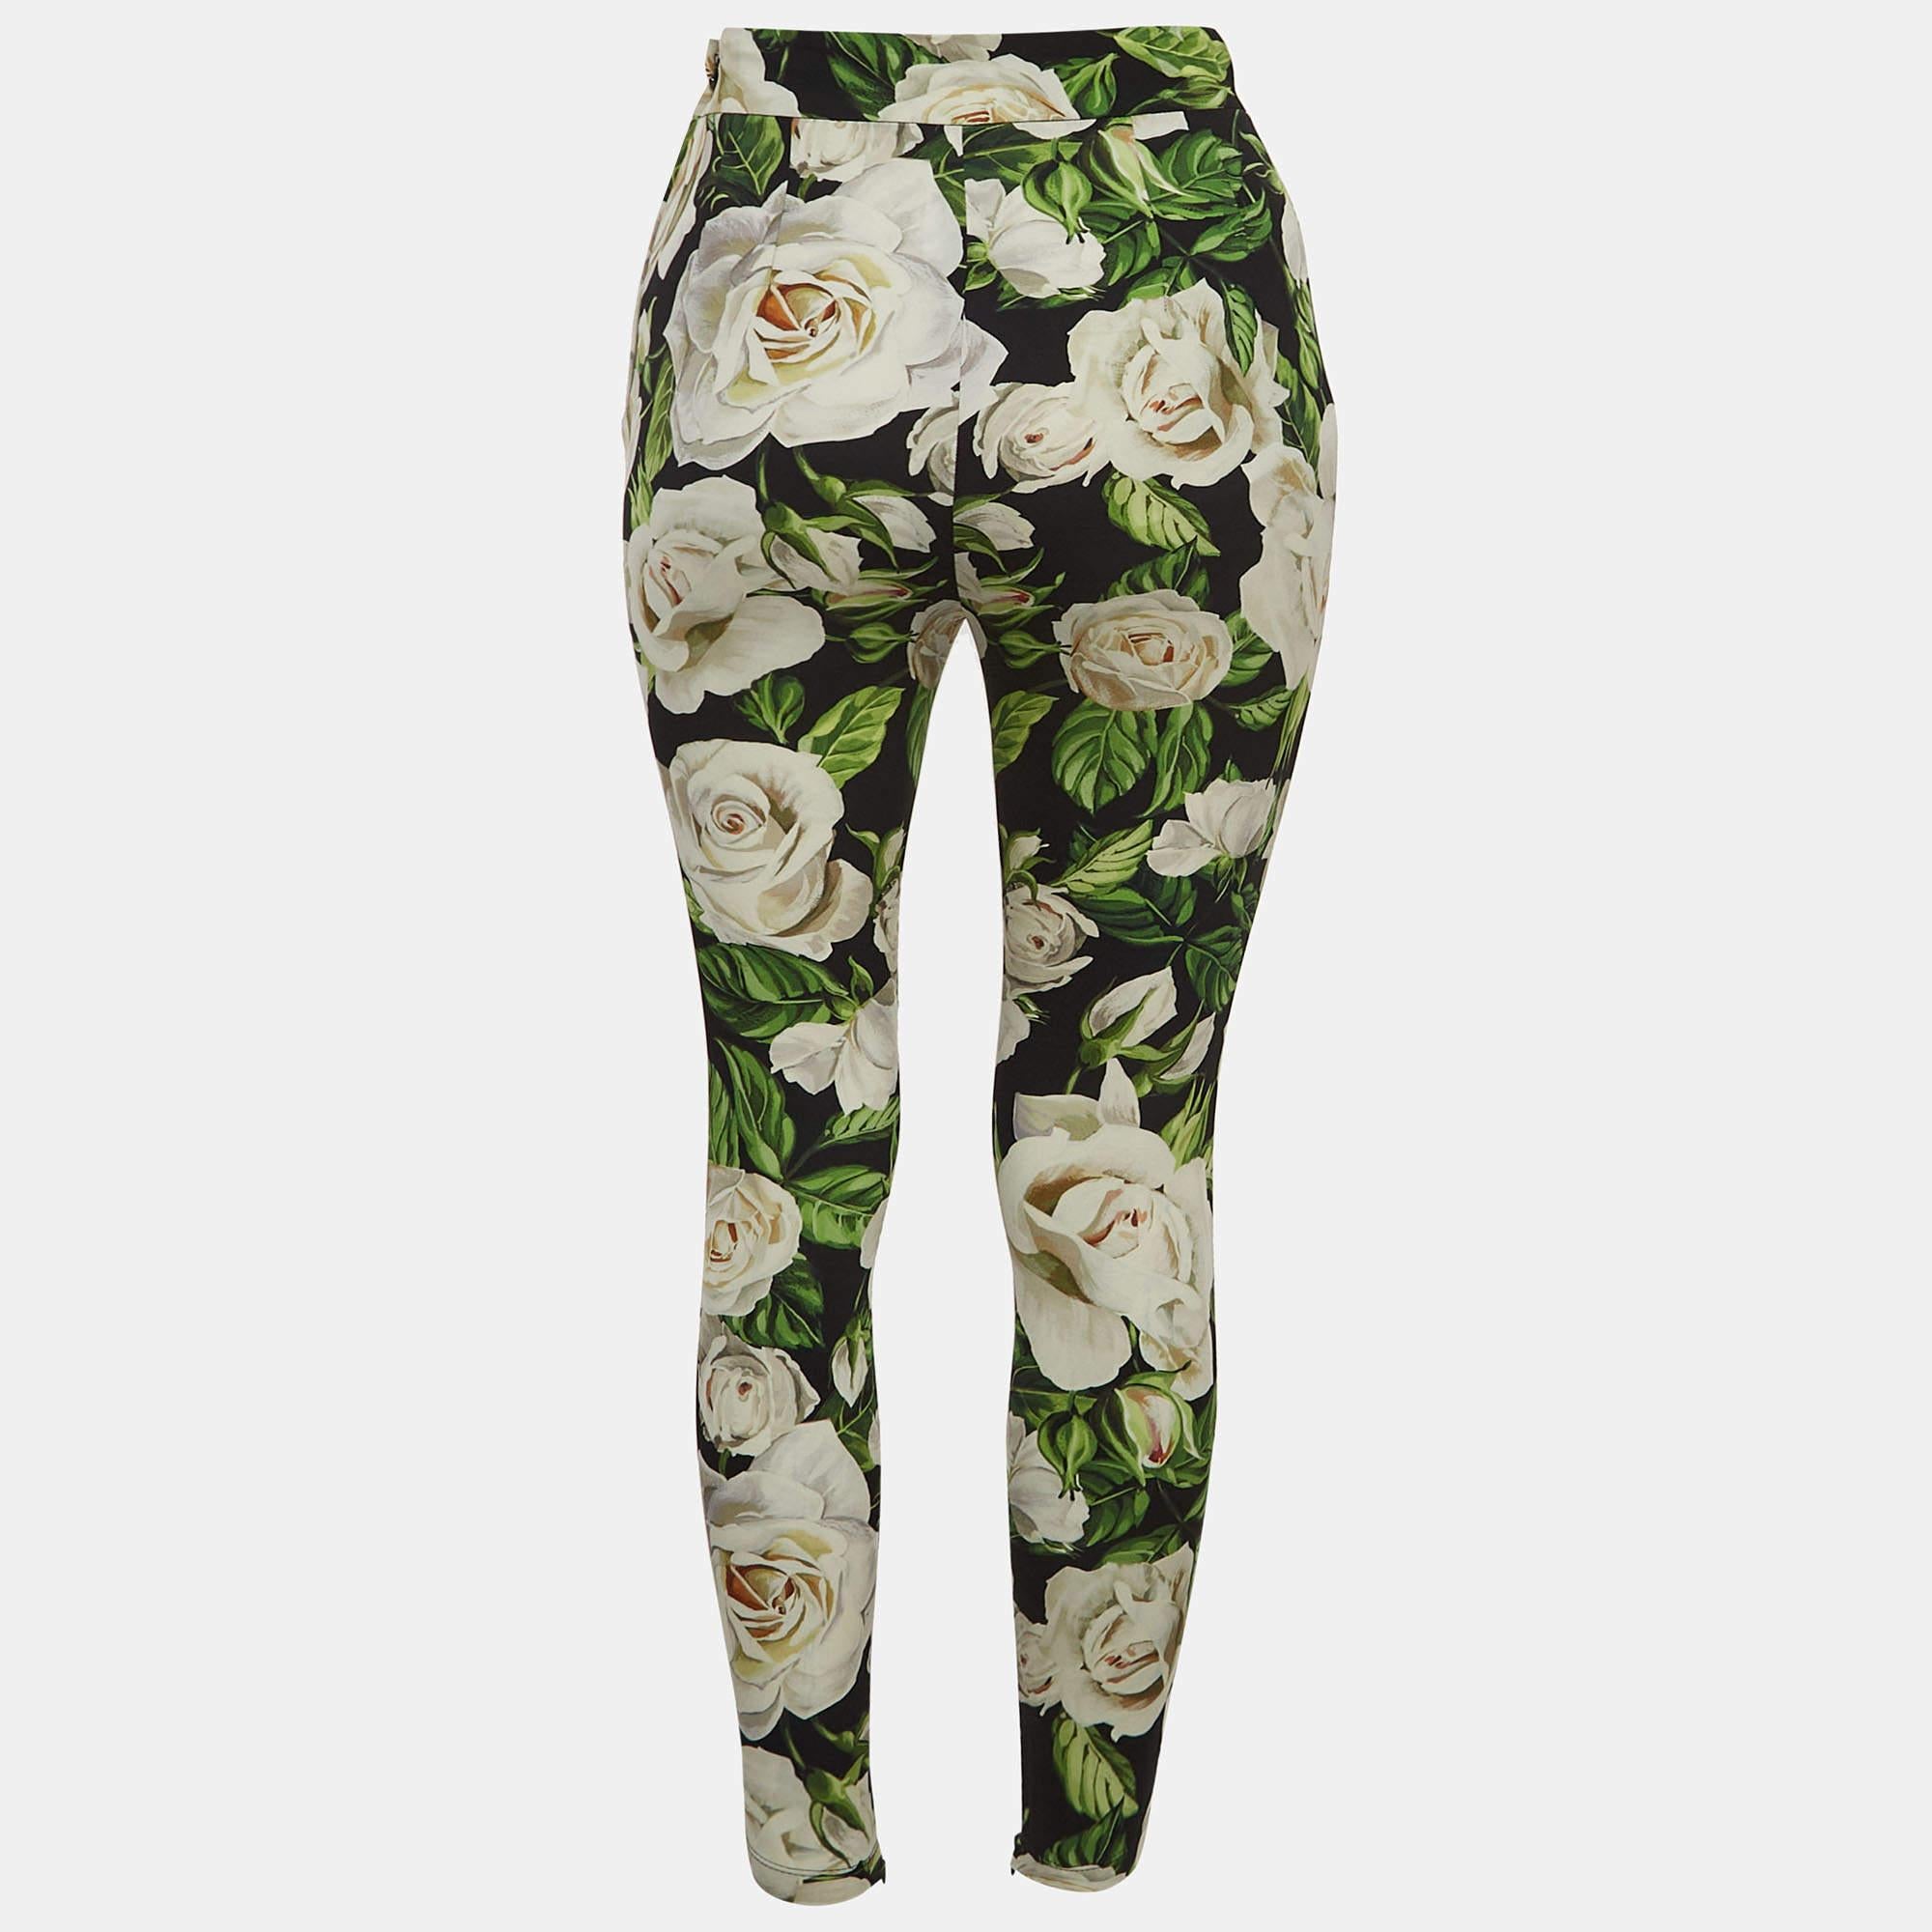 Ultra-modern and cool skin-fitted trousers from Dolce & Gabbana will make you look different from the rest of the crowd. It is crafted from silk, featuring multicolored floral print.

